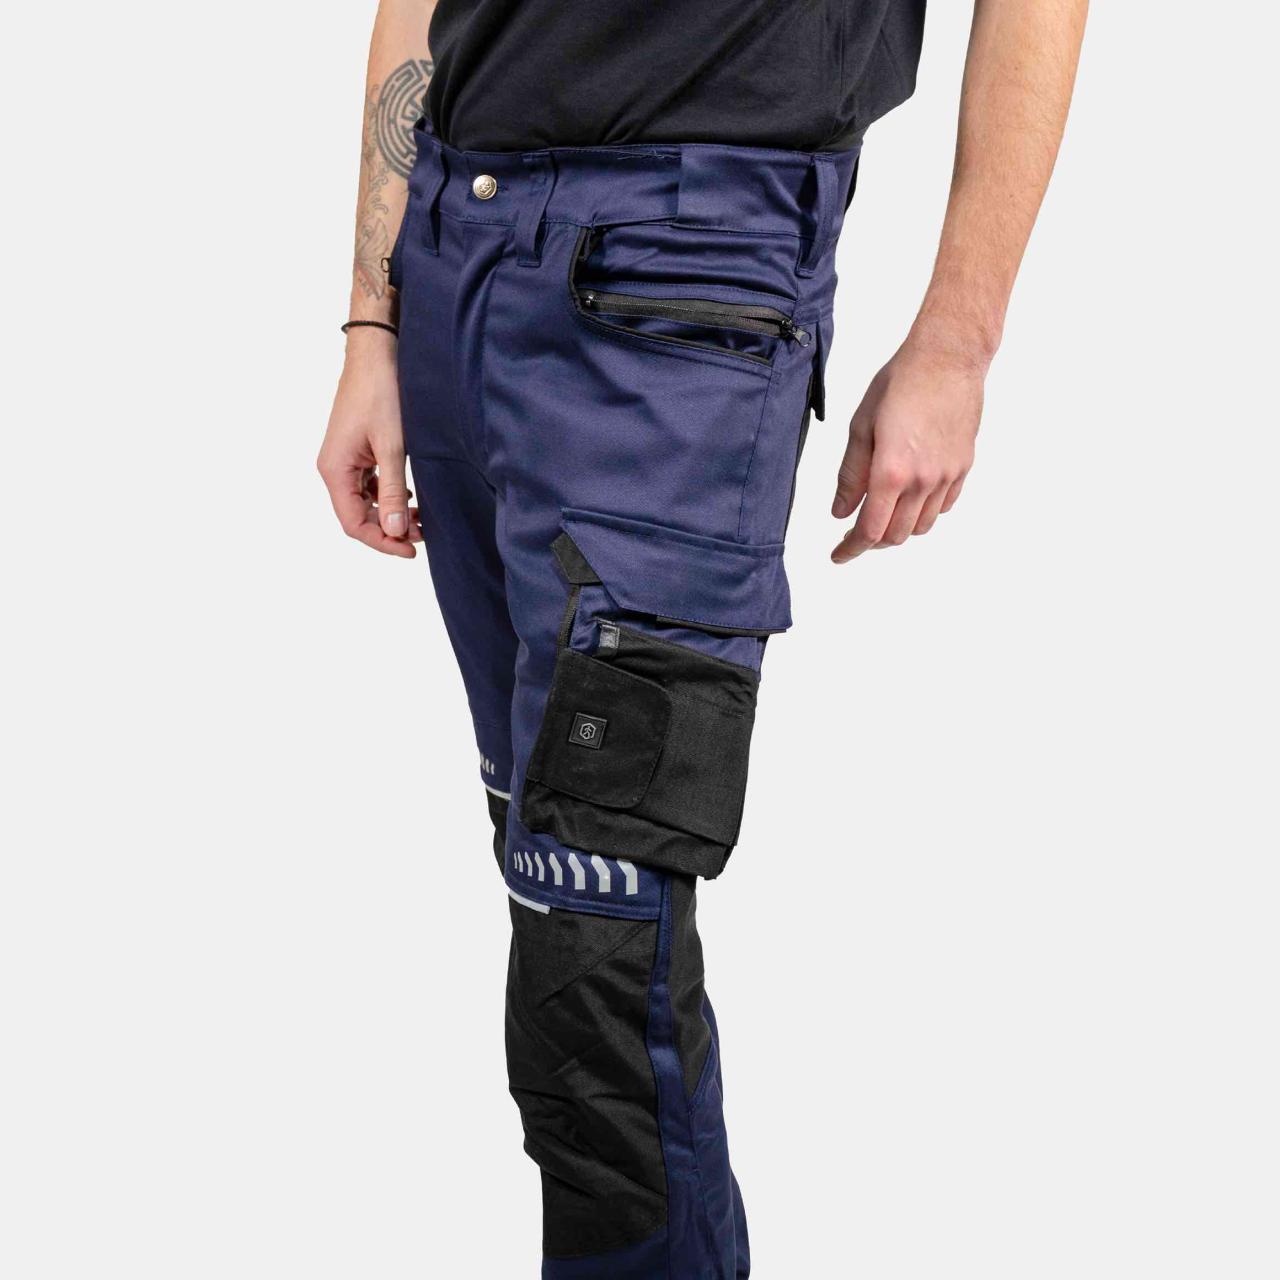 Particle Plus Size Track Pants Joggers Oversized Dark Navy Blue for Men,  Size XL 6TRATPNB1XL : Amazon.in: Clothing & Accessories